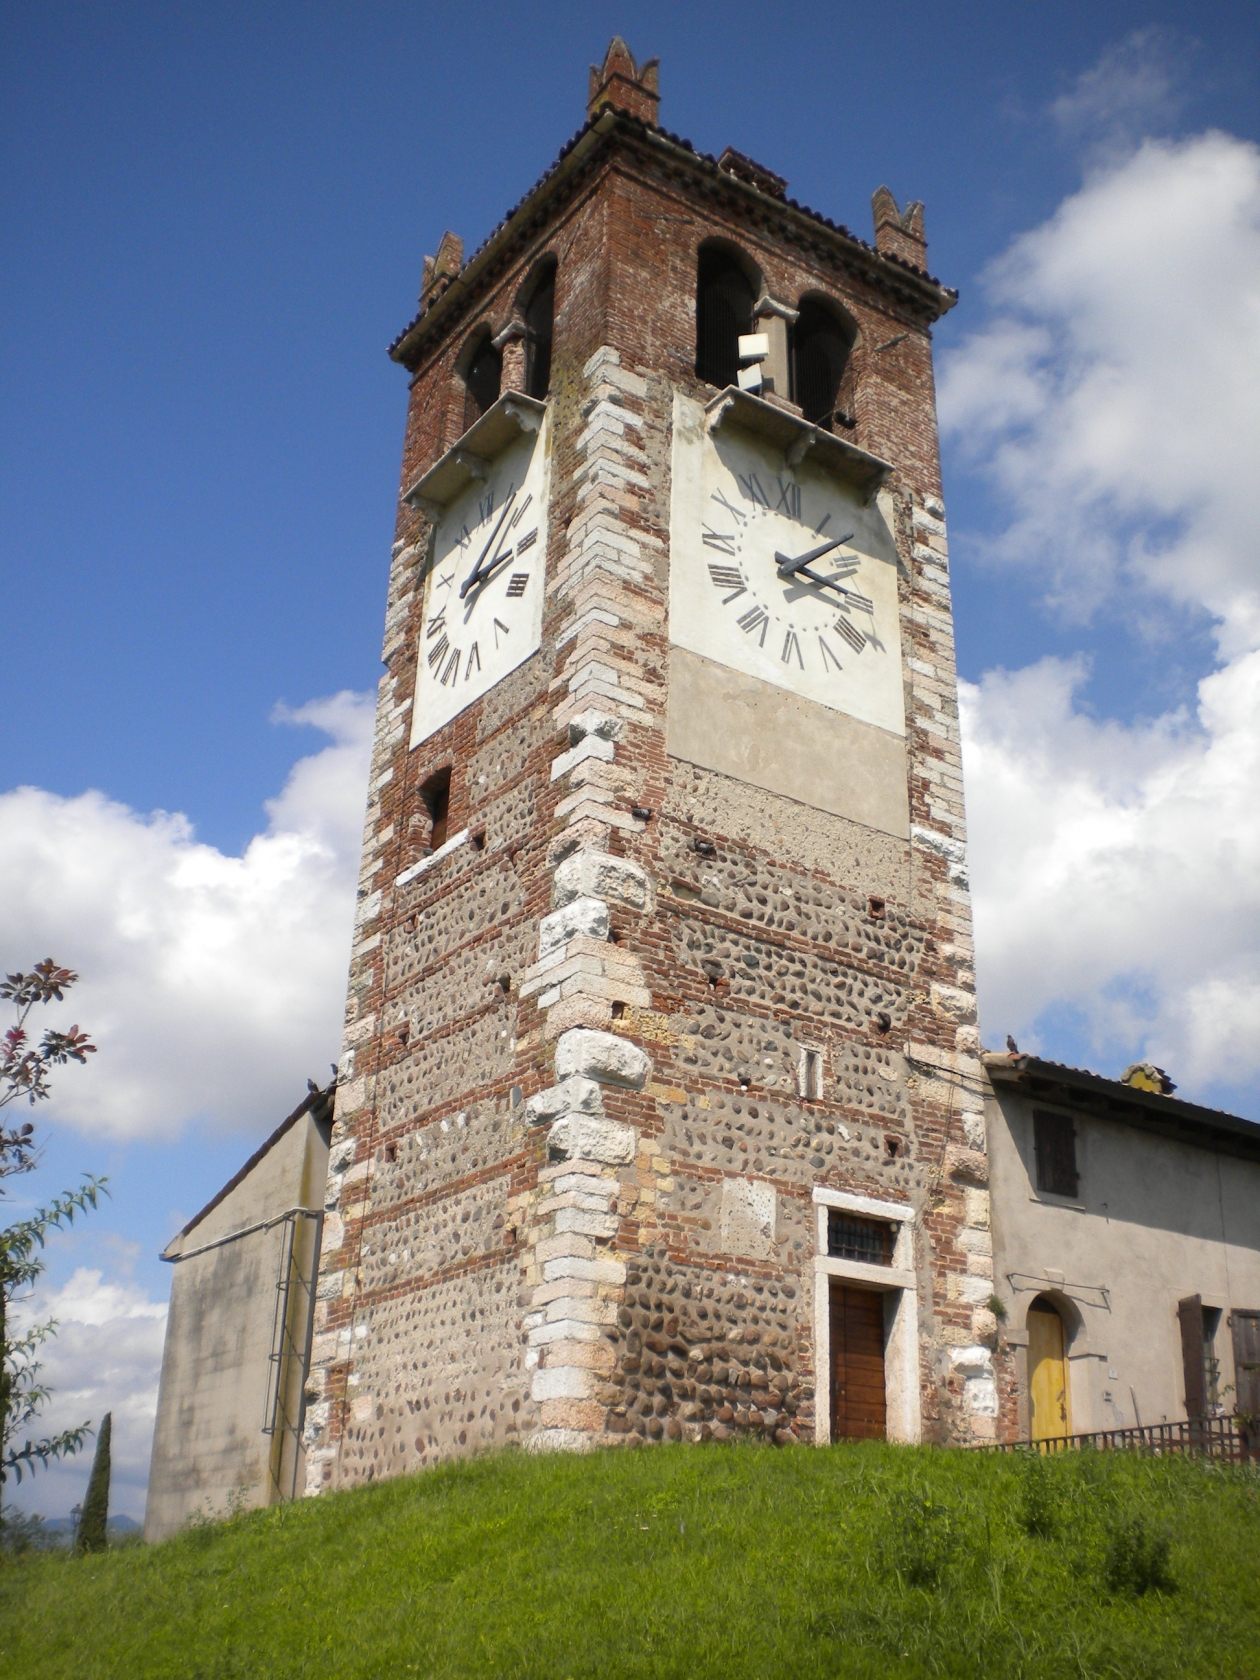 The Scaliger Tower of Palazzolo - Terre del Custoza